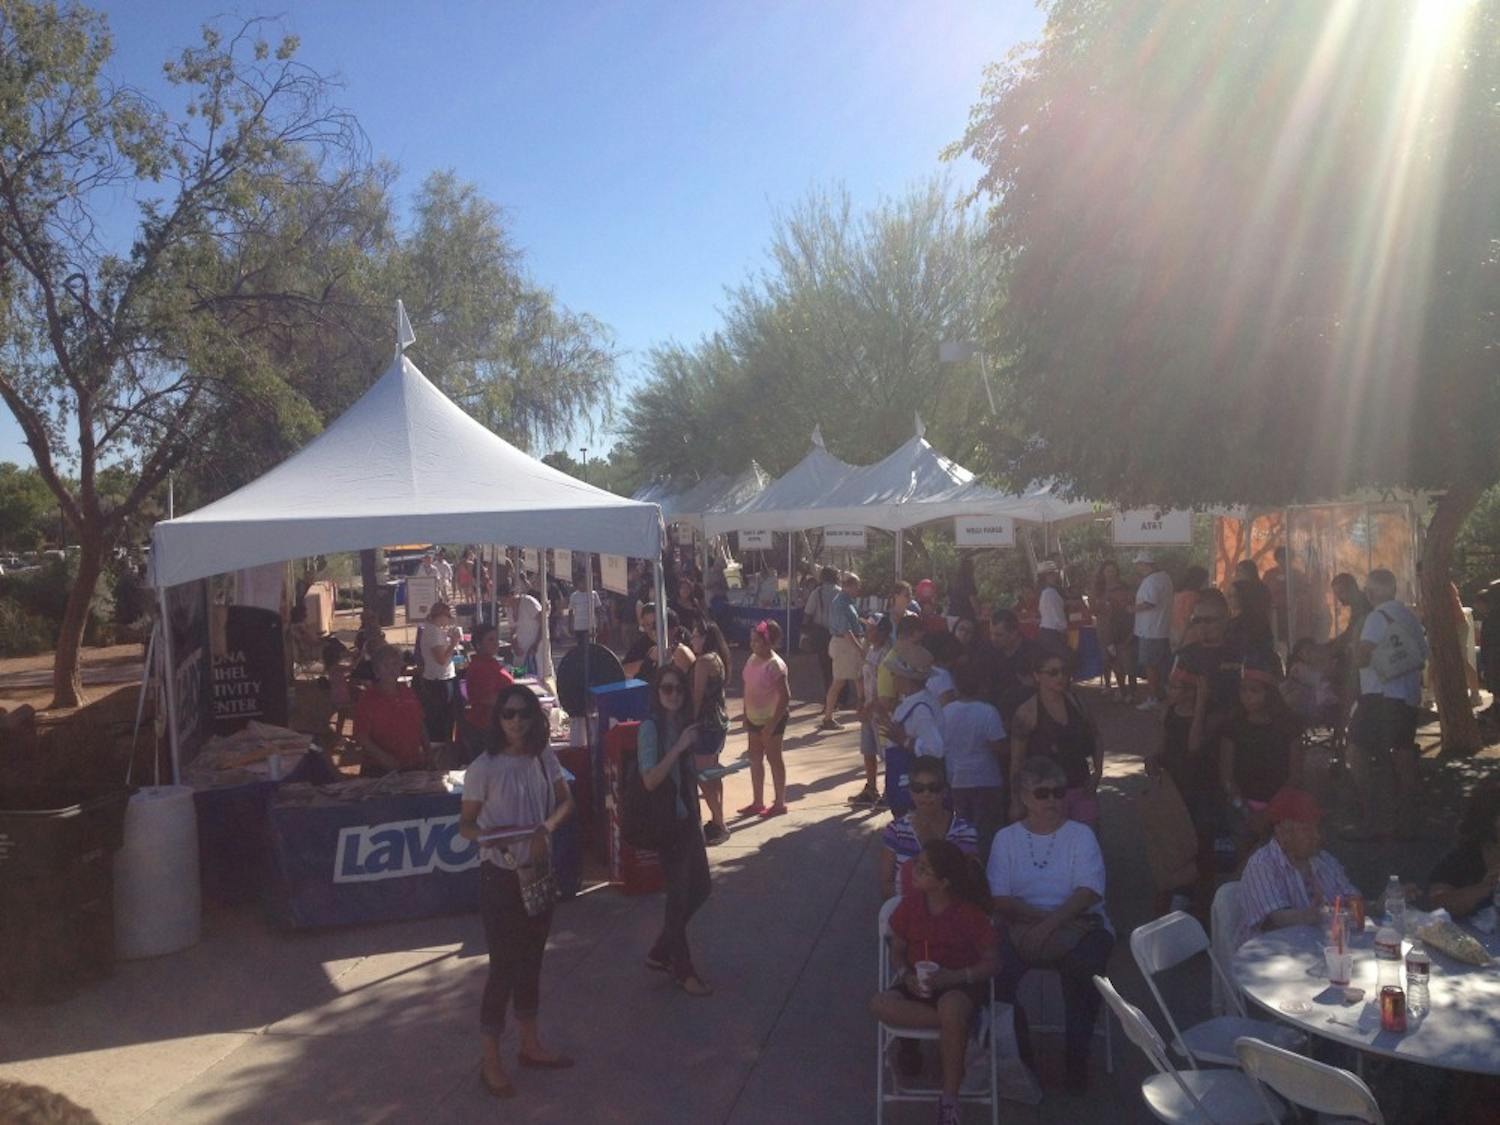 Festival-goers enjoy food, crafts, and a lot of Tempe history.